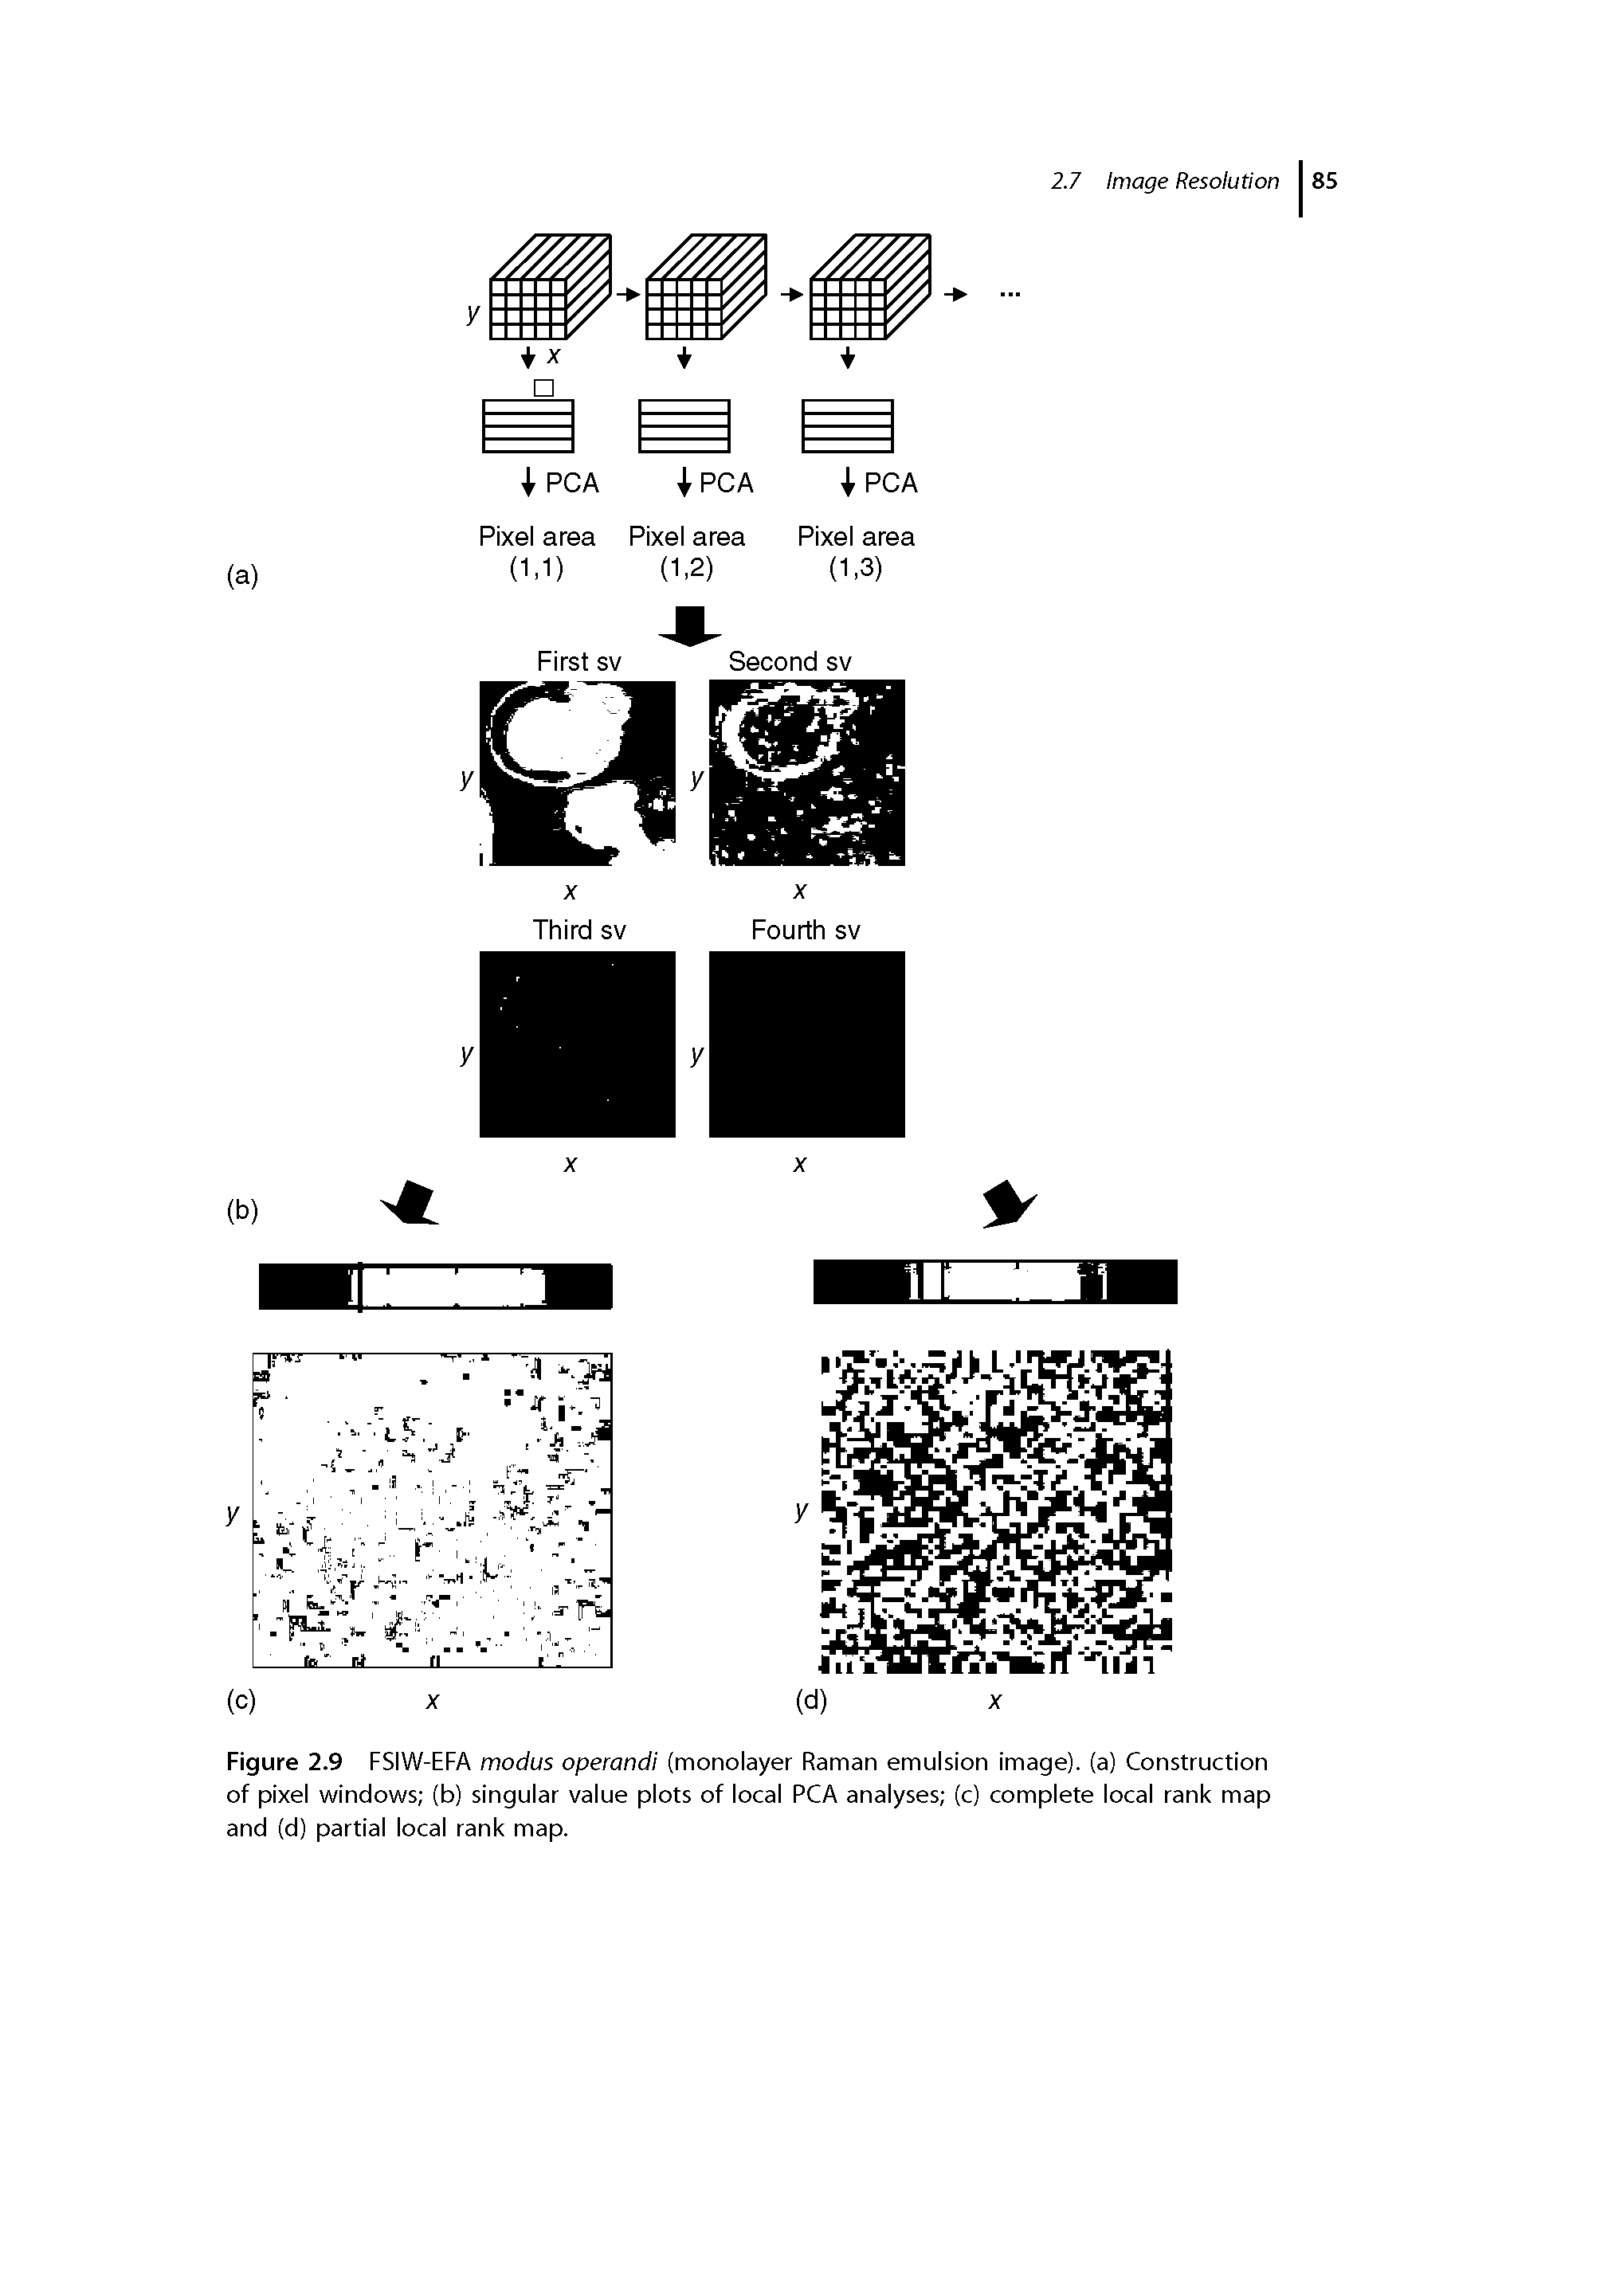 Figure 2.9 FSIW-EFA modus operand (monolayer Raman emulsion image), (a) Construction of pixel windows (b) singular value plots of local PCA analyses (c) complete local rank map and (d) partial local rank map.